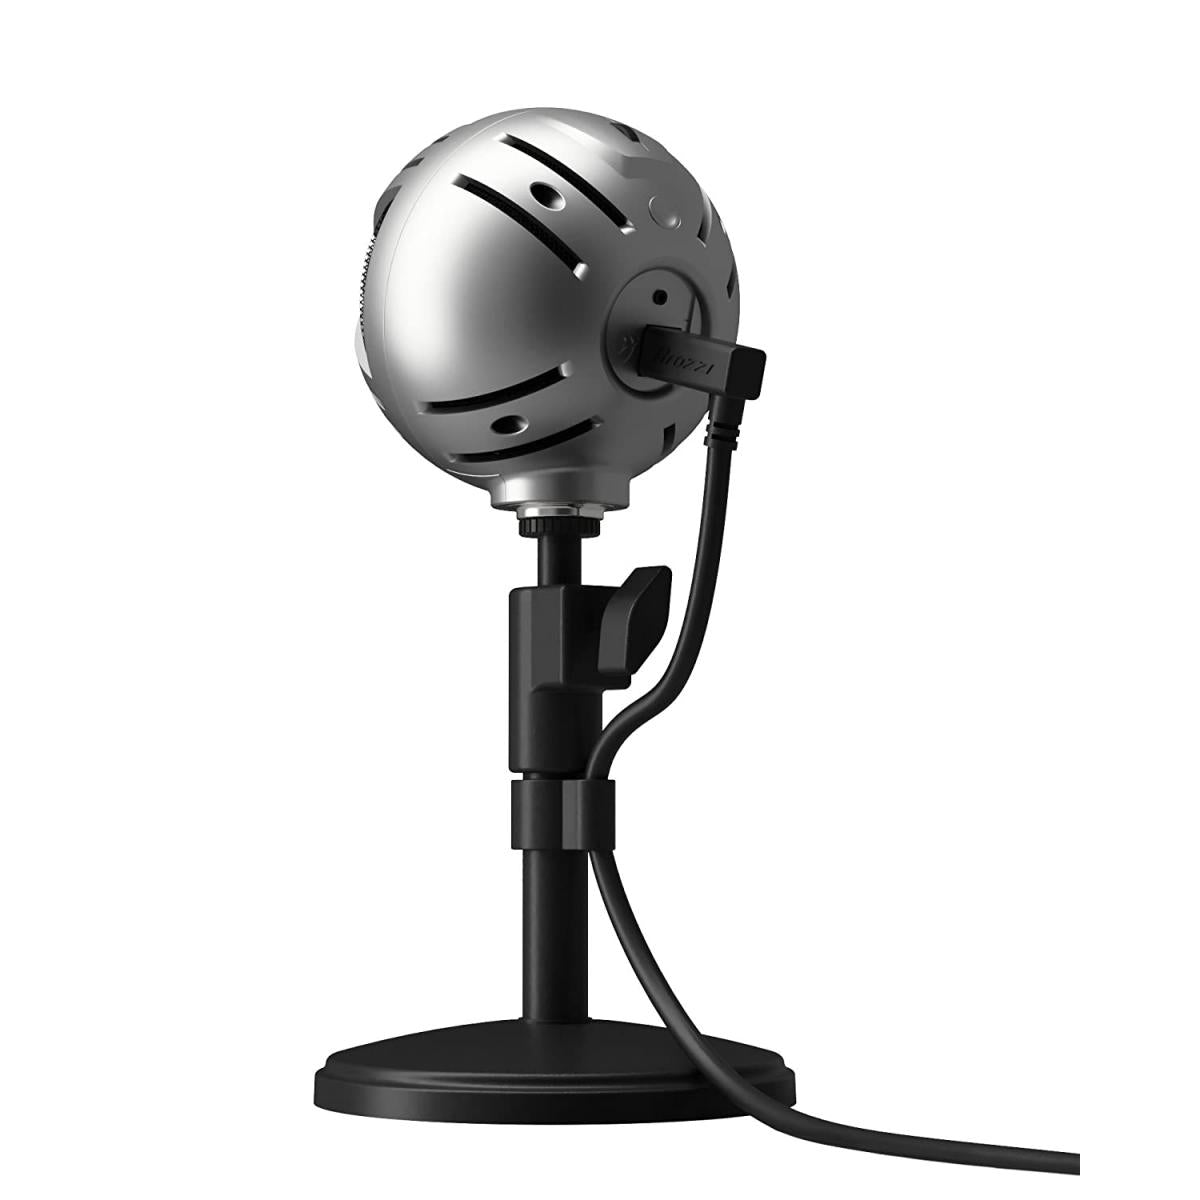 Arozzi Sfera PRO USB Microphone for Gaming & Streaming